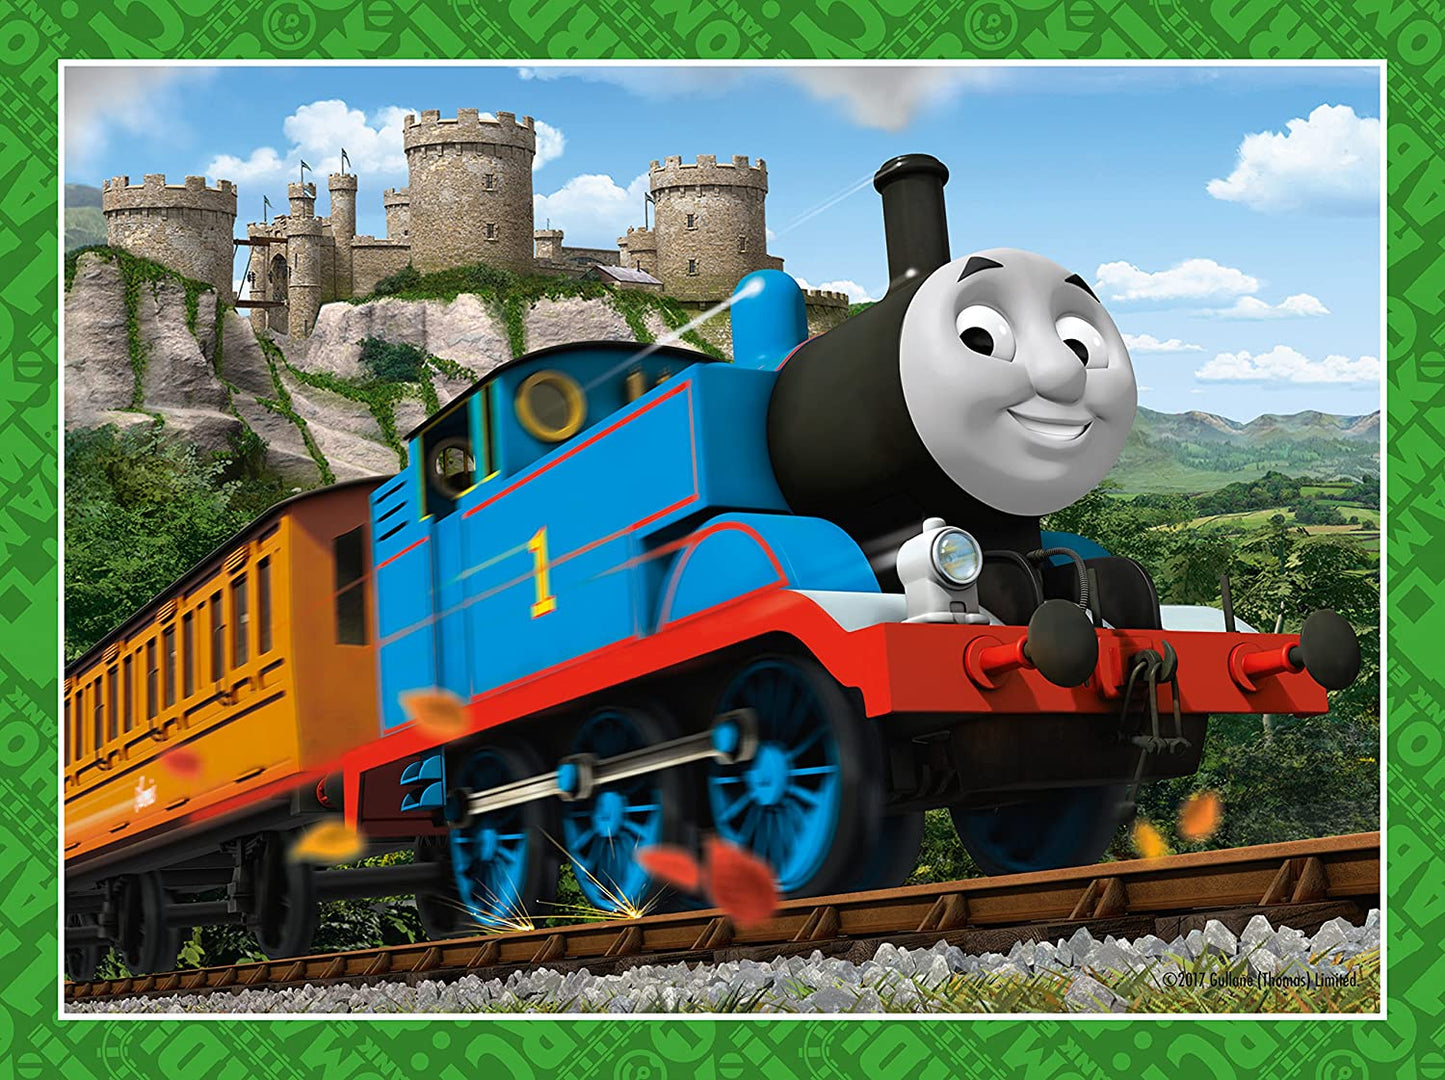 Ravensburger - Thomas & Friends 4 in a Box -  12, 16, 20, 24 Piece Jigsaw Puzzle